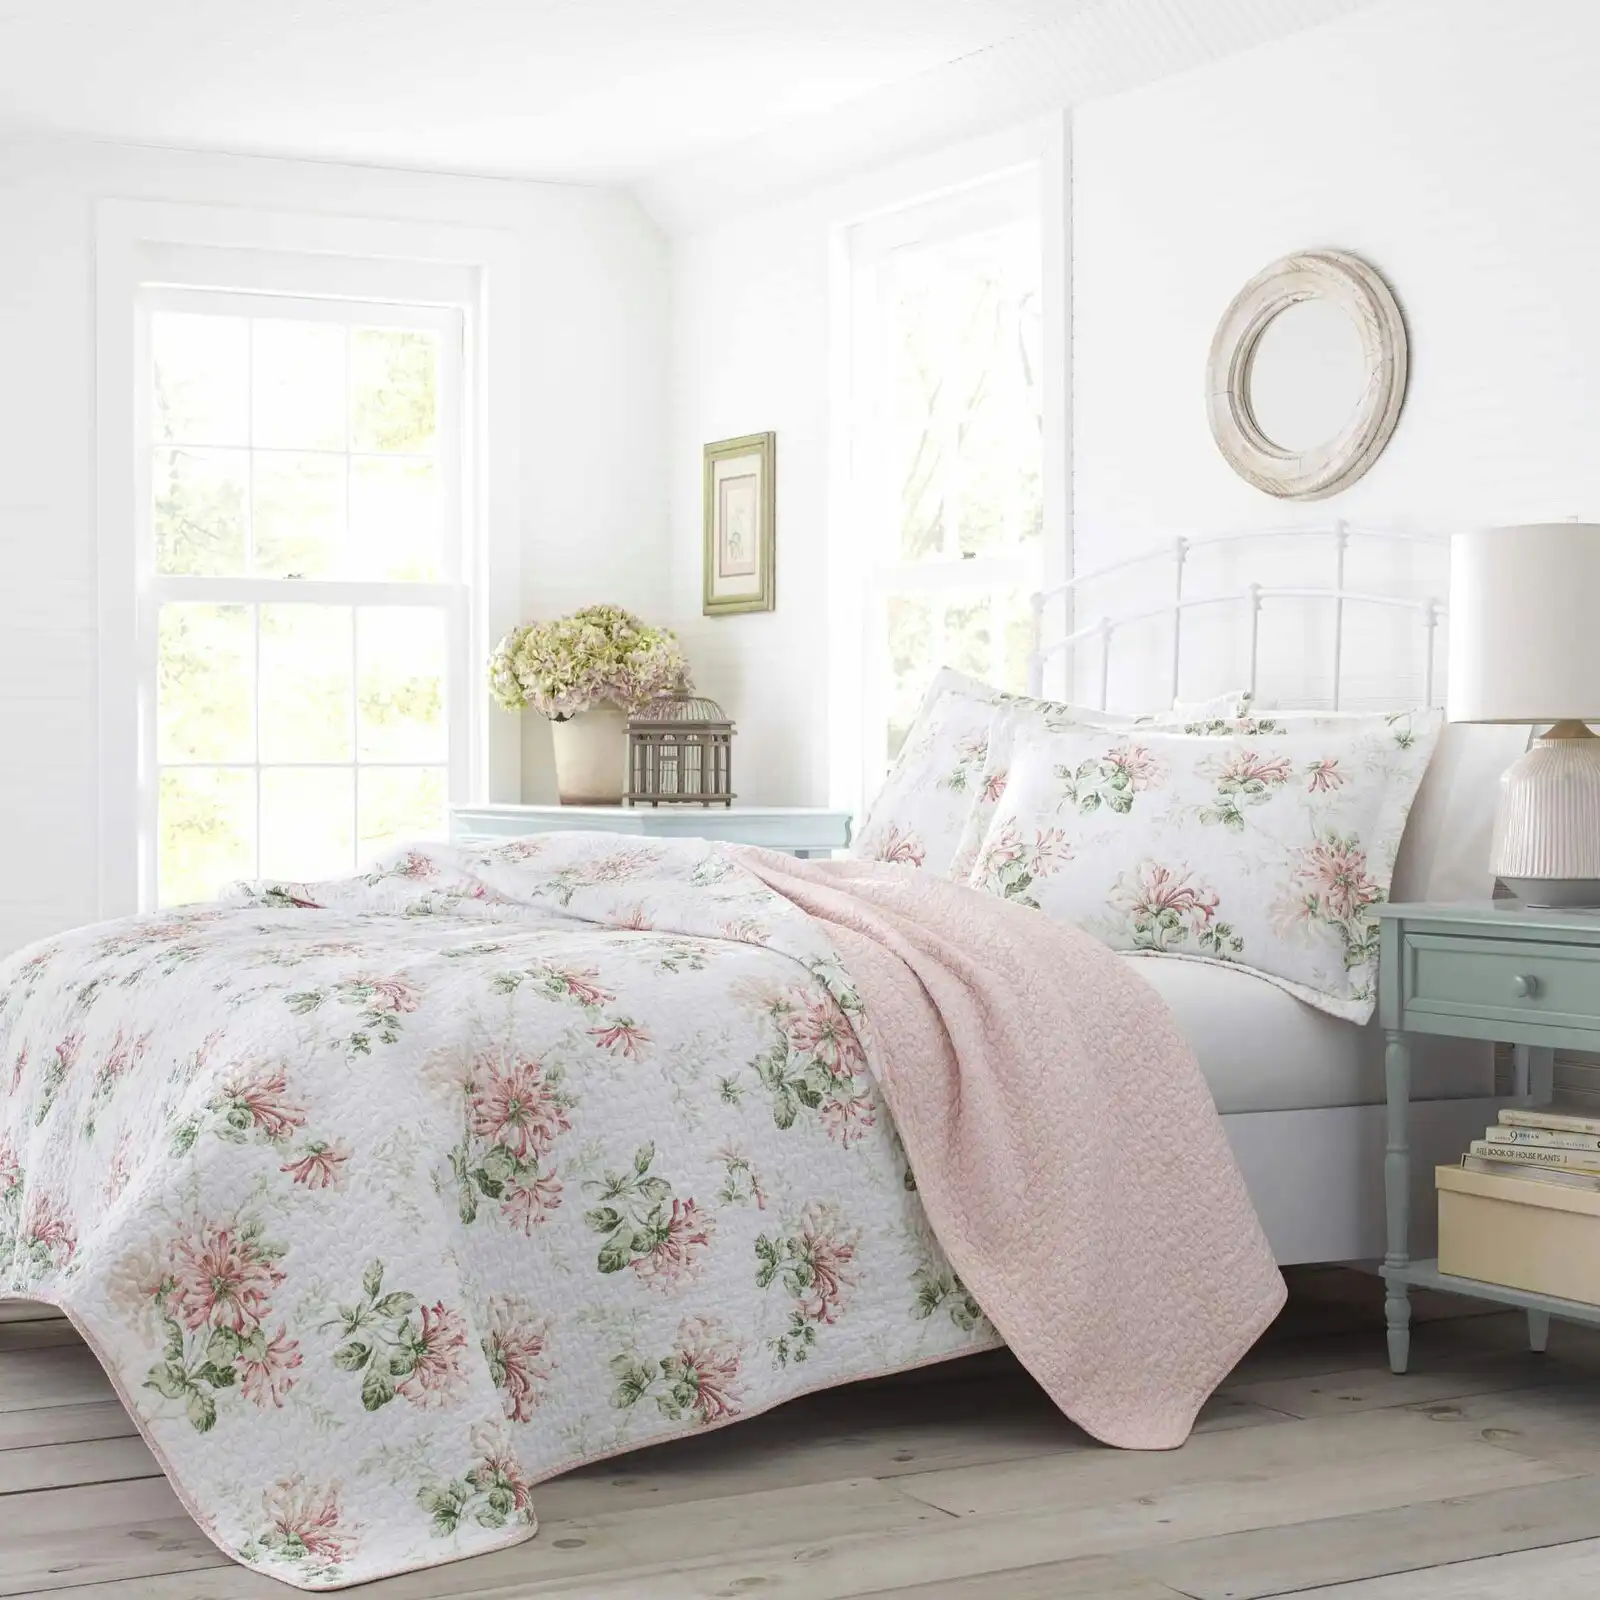 Laura Ashley Queen/King Bed Honeysuckle Coverlet w/ 2x Pillowcases Set Blush